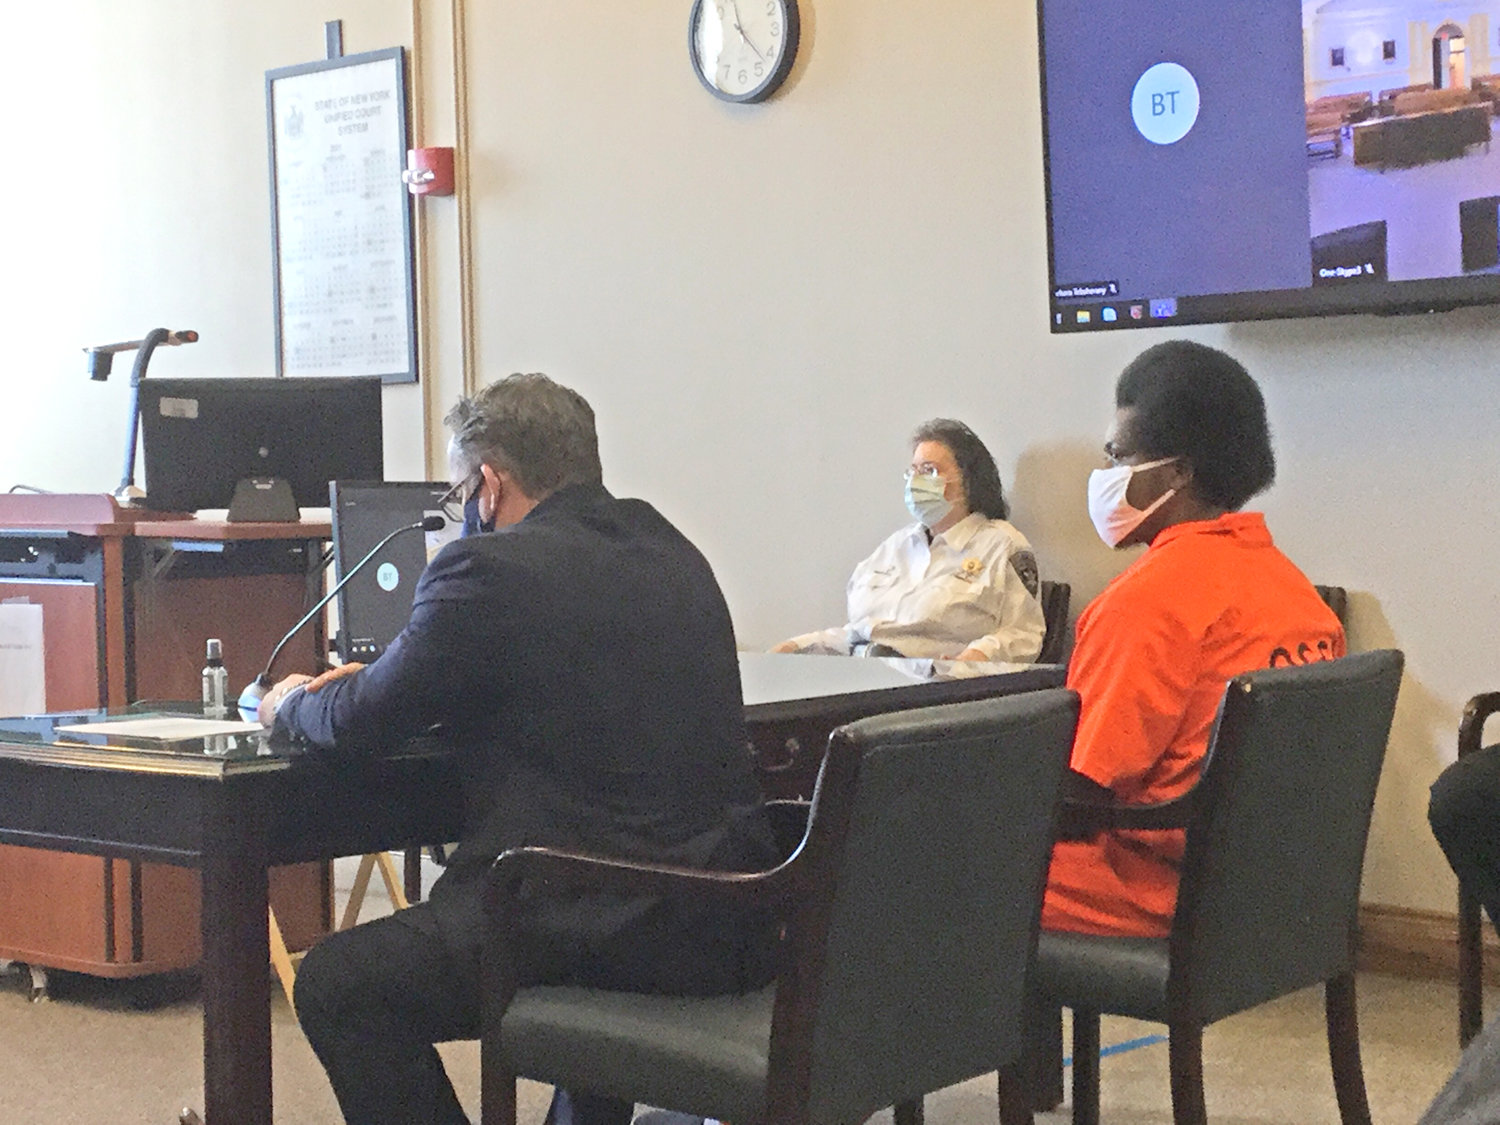 SUPPRESSION HEARING HELD — Travon Golden, of Canandiagua, appeared for a suppression hearing in County Court on Monday. Golden is one of two men charged in the August shooting of Tyler McBain in Oneida Castle. A trial is tentatively scheduled for the fall.